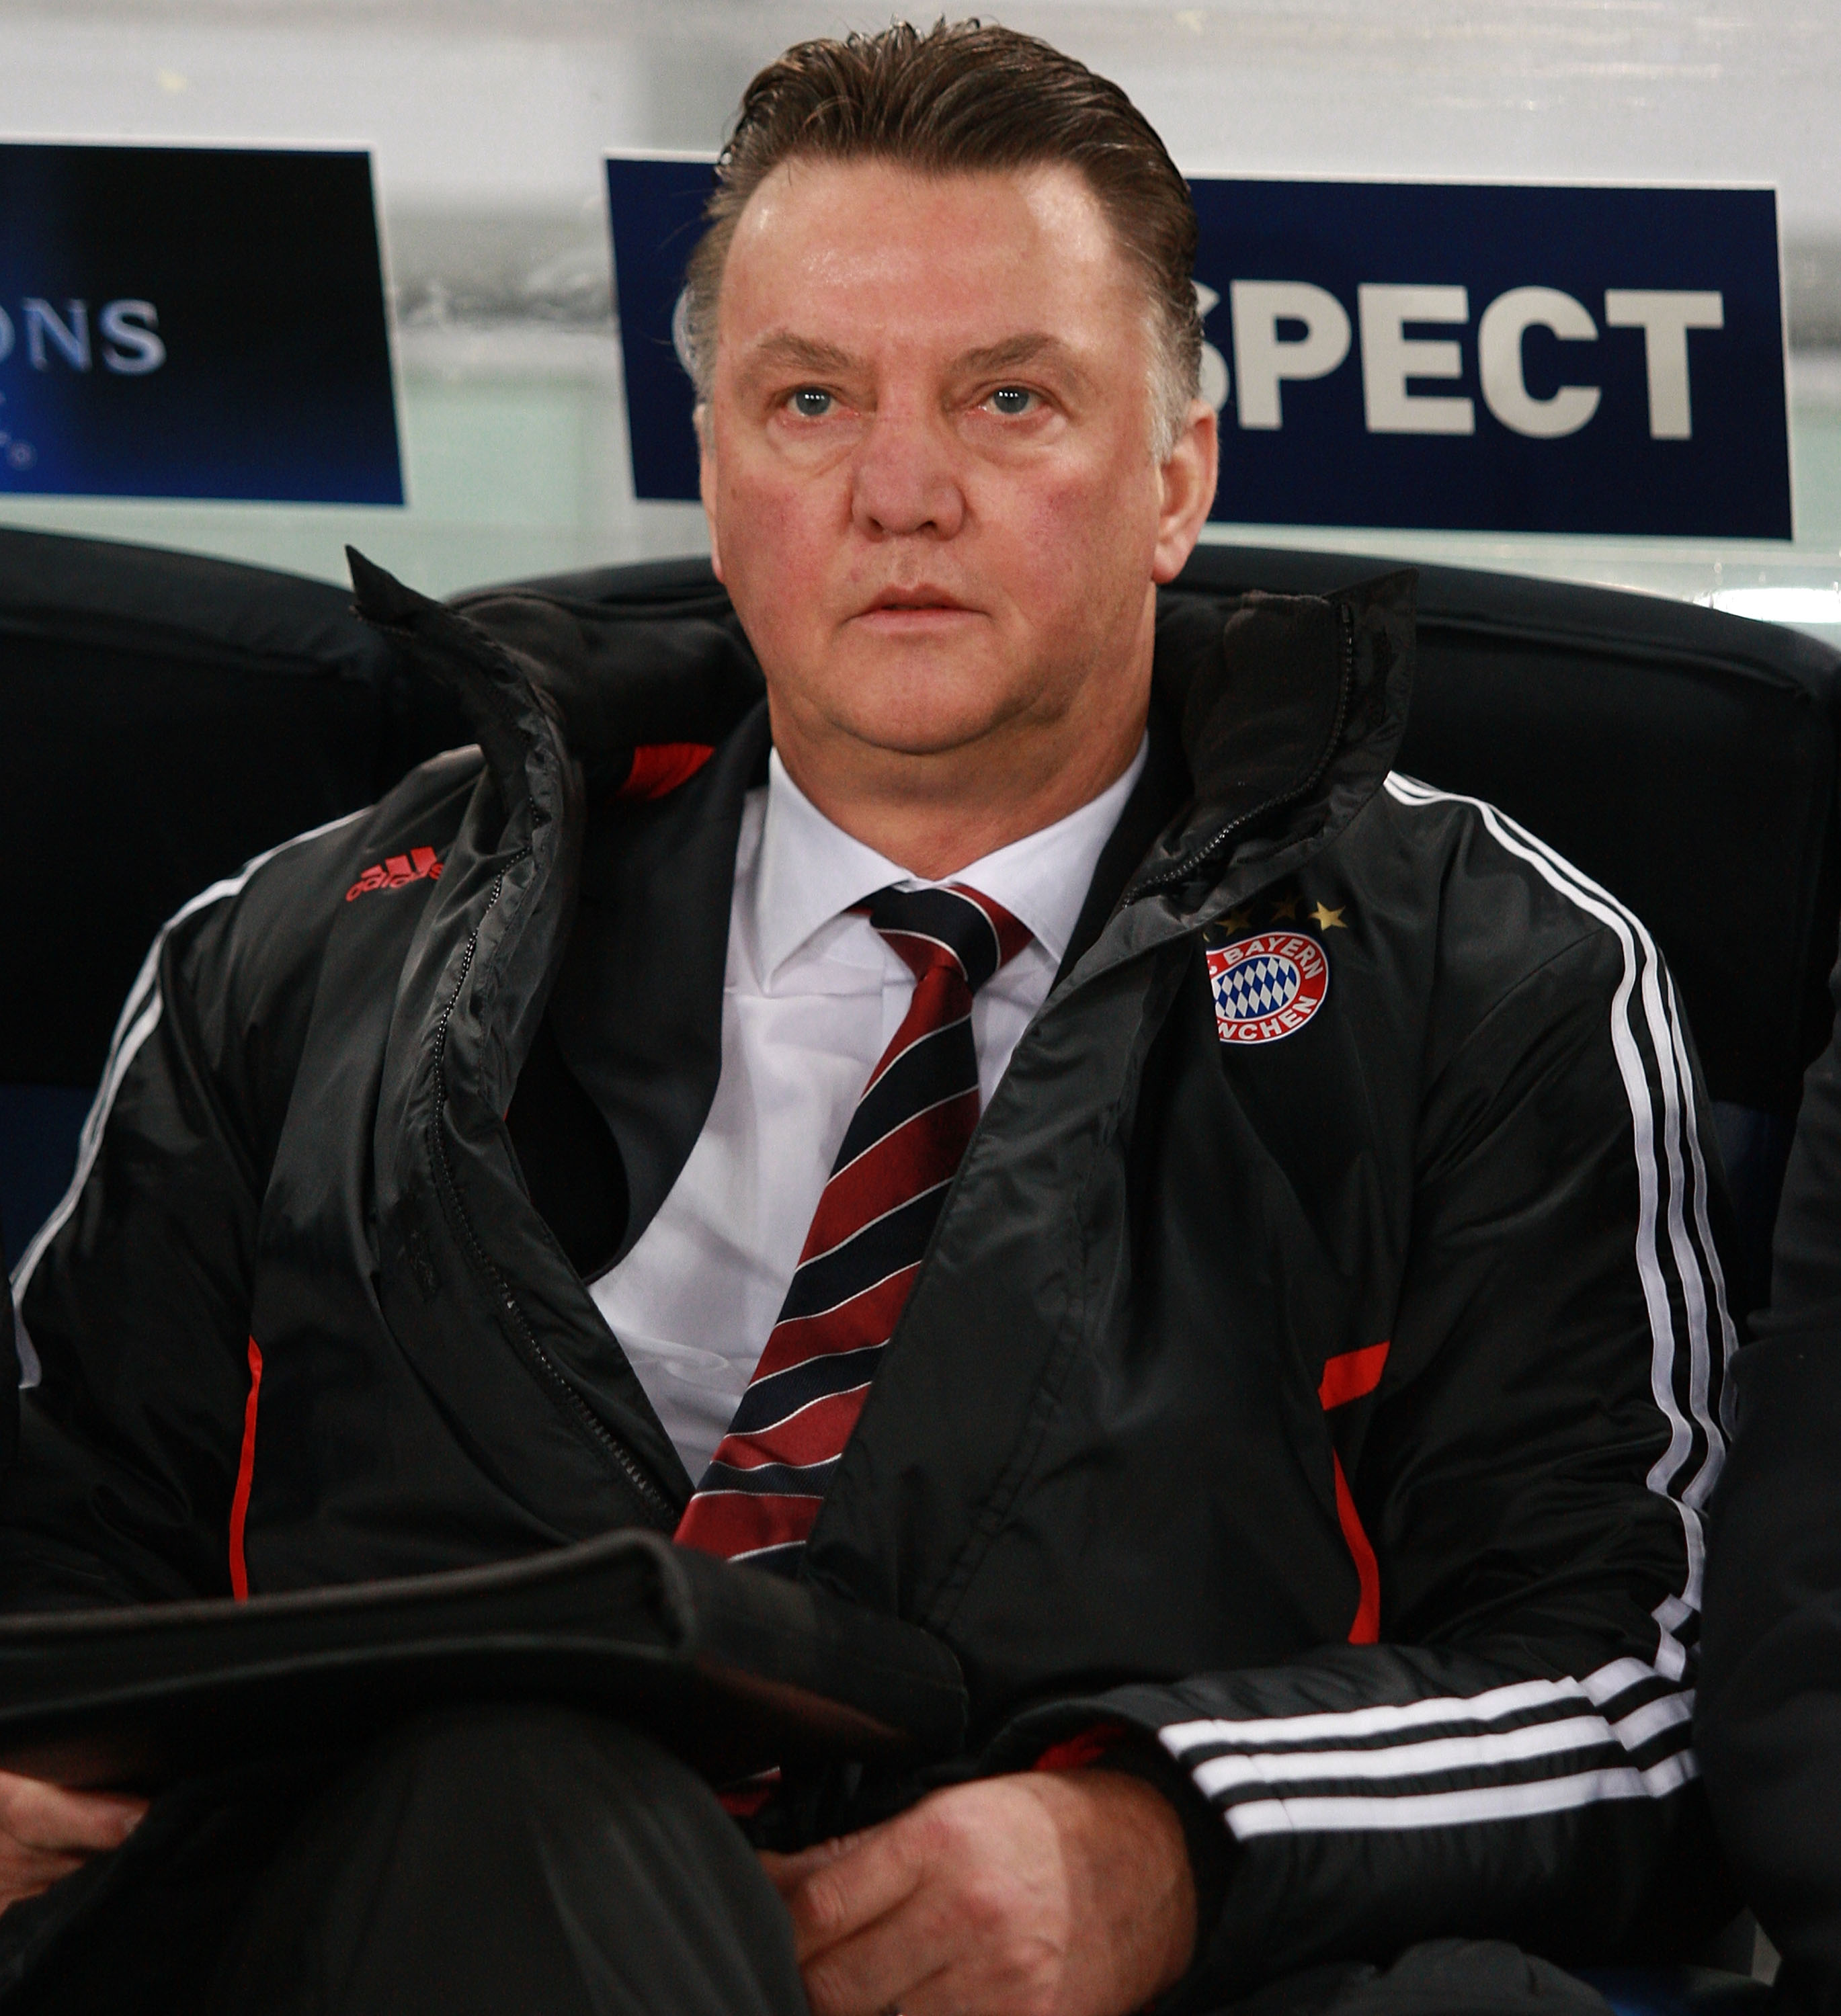 ROME - NOVEMBER 23: Louis Van Gaal the coach of FC Bayern Muenchen looks on during the UEFA Champions League Group E match between AS Roma and FC Bayern Muenchen at Stadio Olimpico on November 23, 2010 in Rome, Italy.  (Photo by Paolo Bruno/Getty Images)